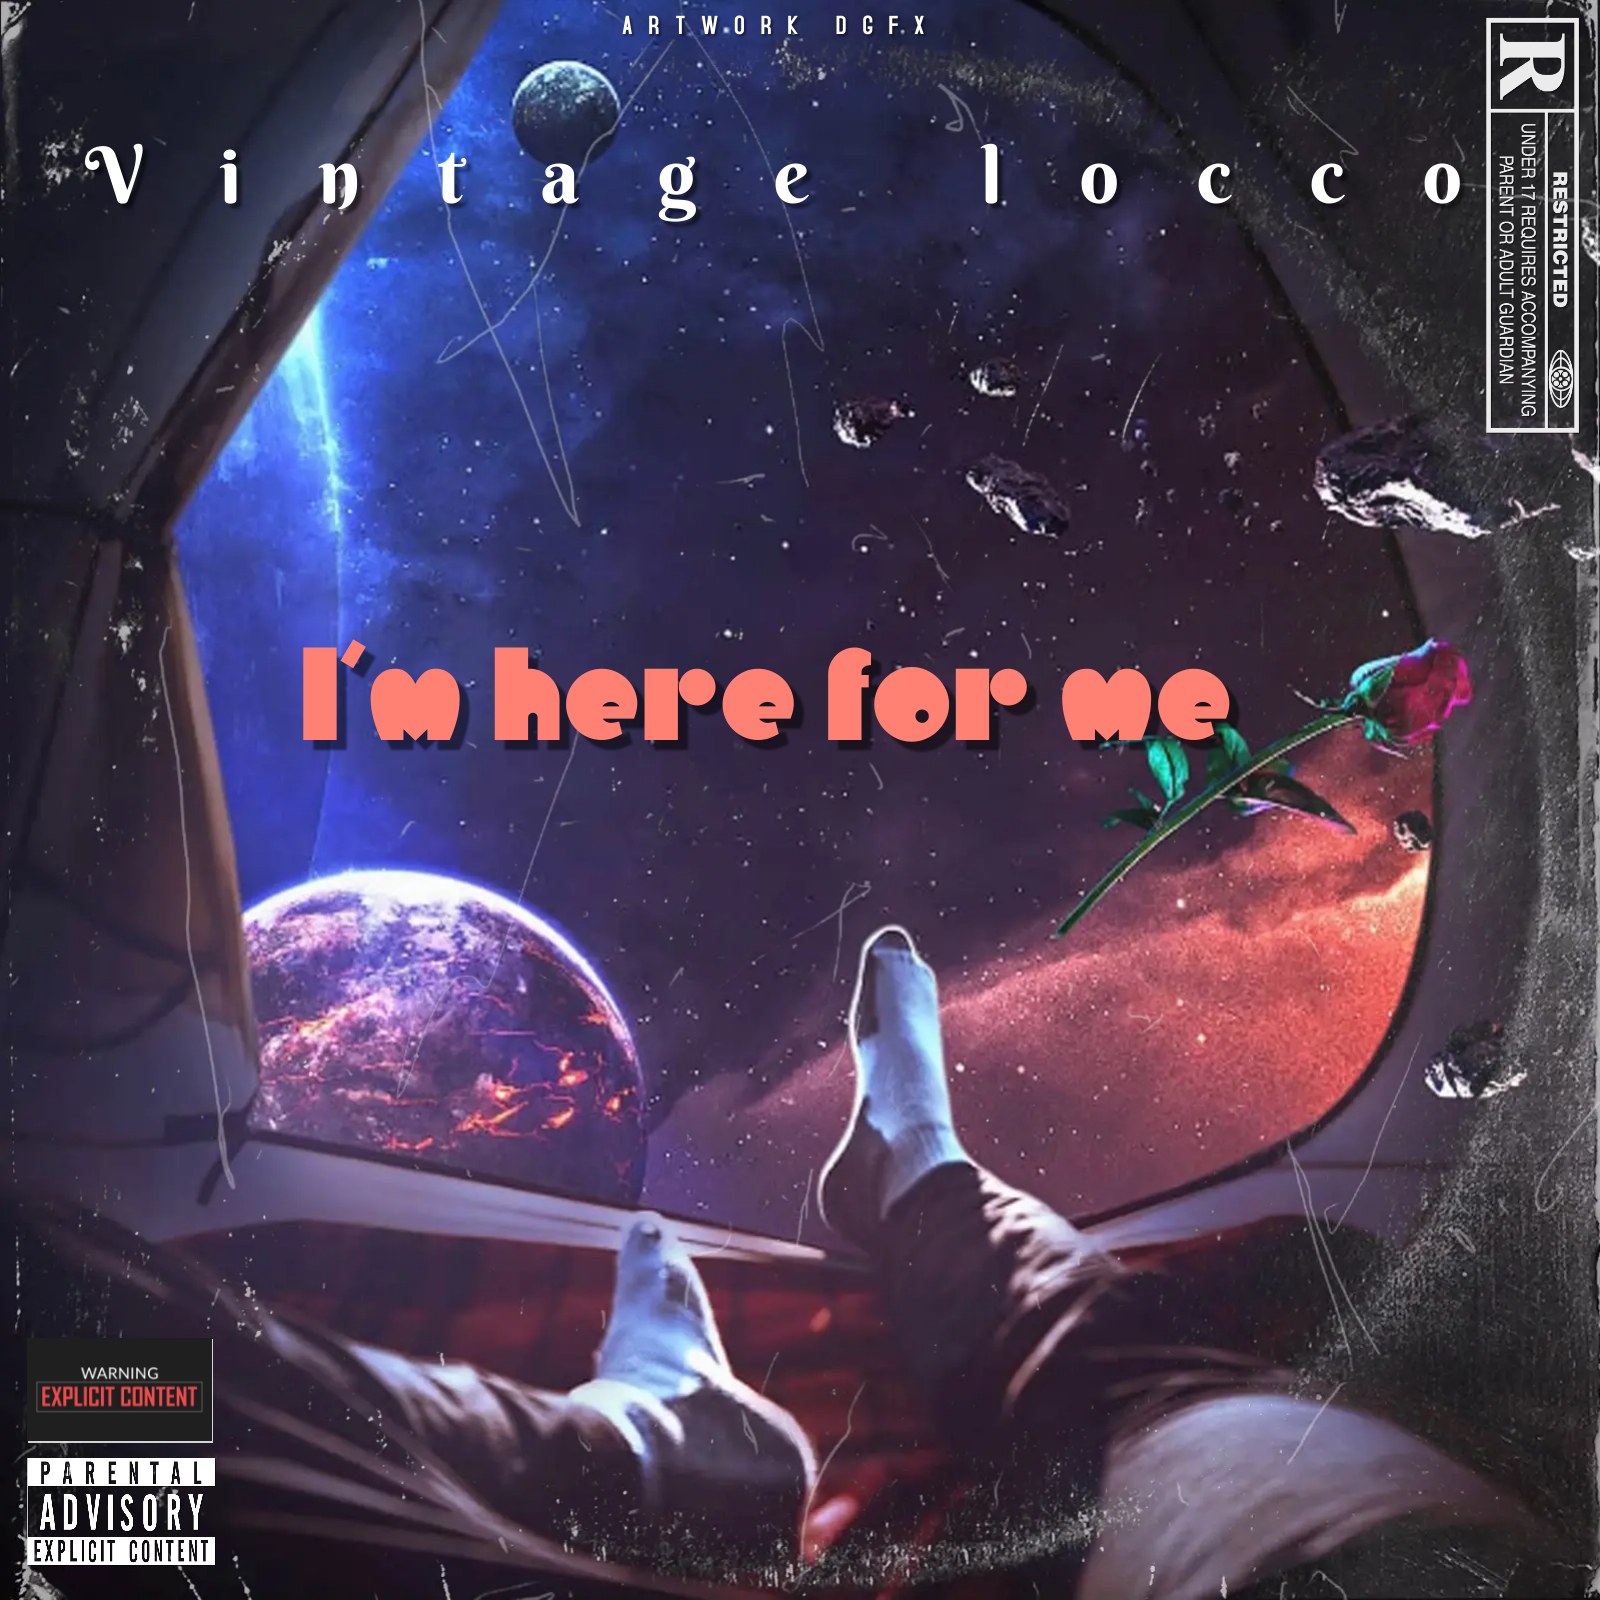 I'm here for me - Vintage locco